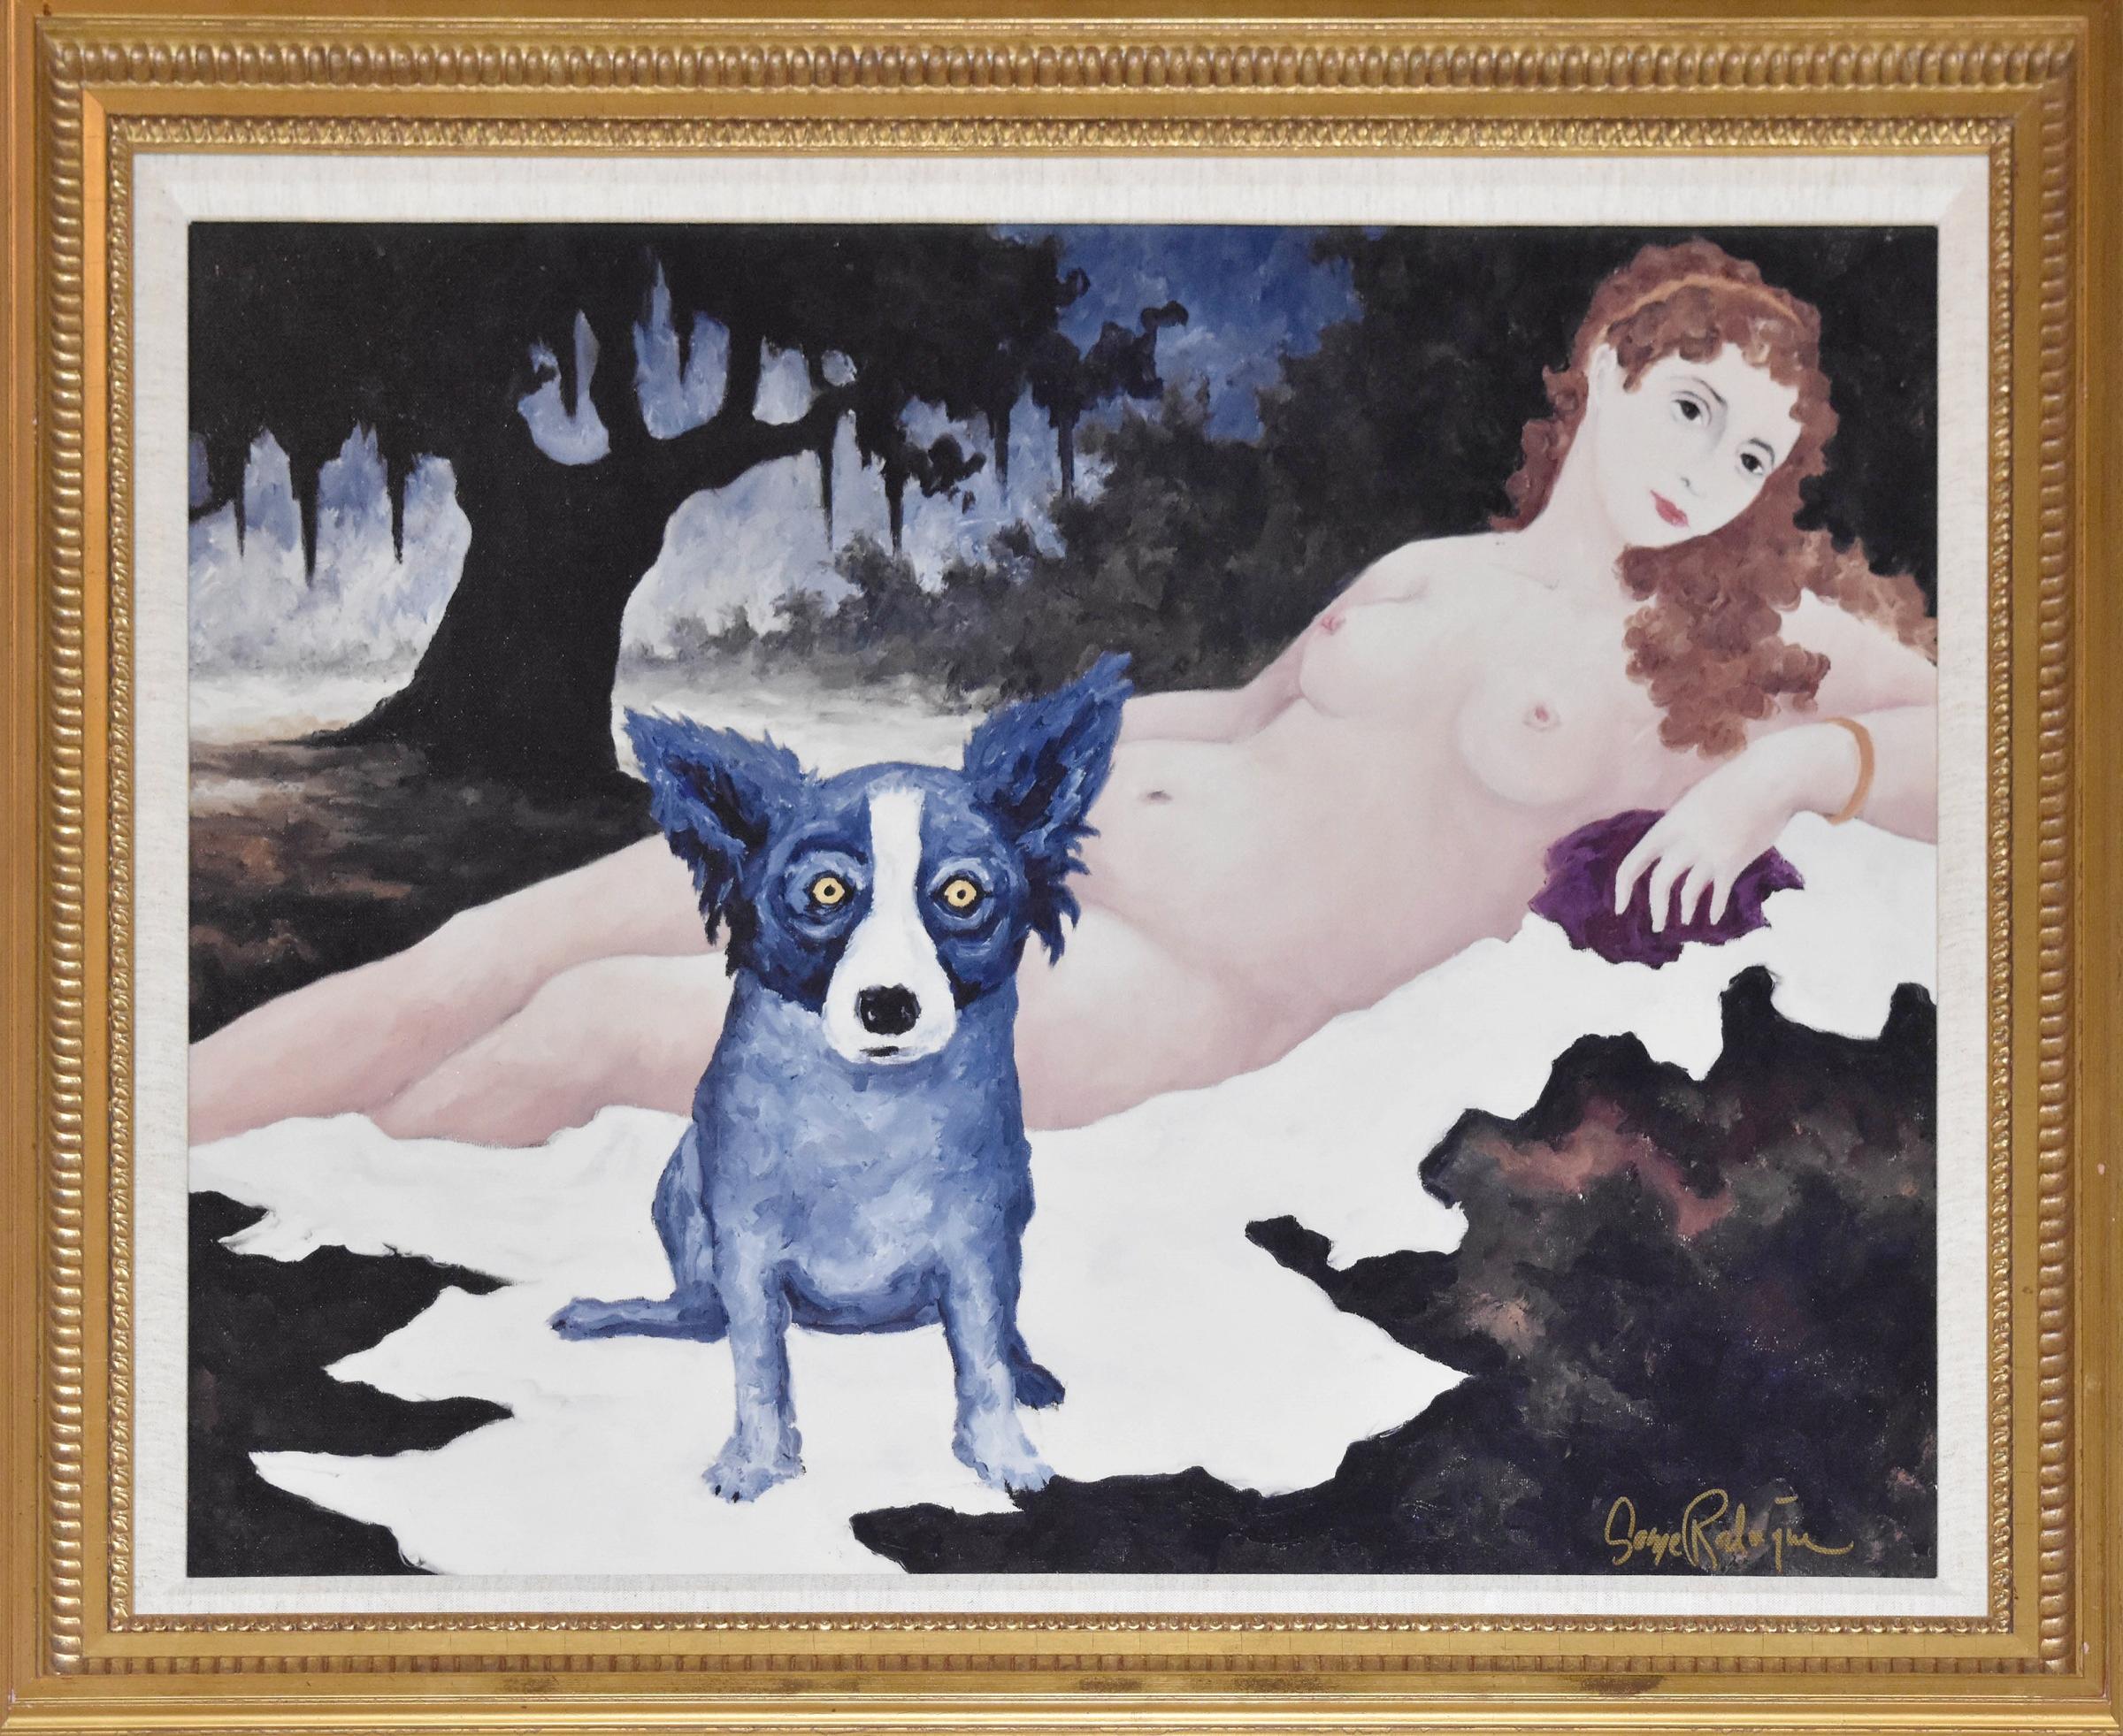 George Rodrigue Animal Print - Wrong Century - Signed Giclee on Board Rare Blue Dog Print